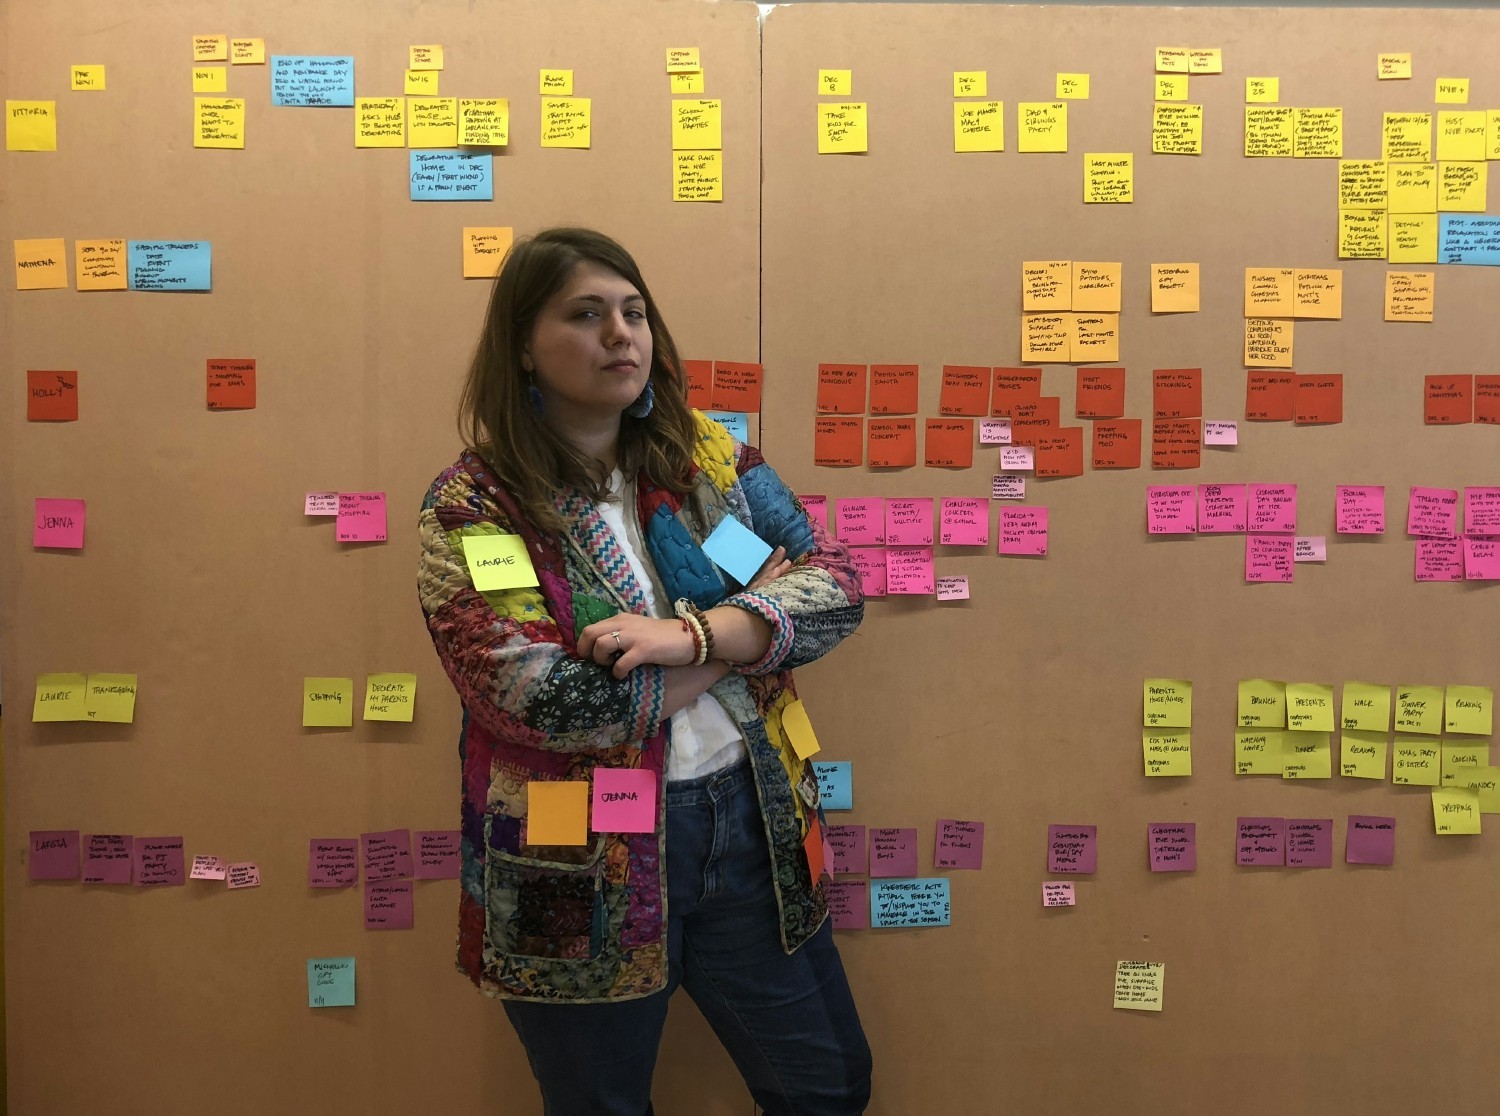 Using post-its to capture ideas (and play).